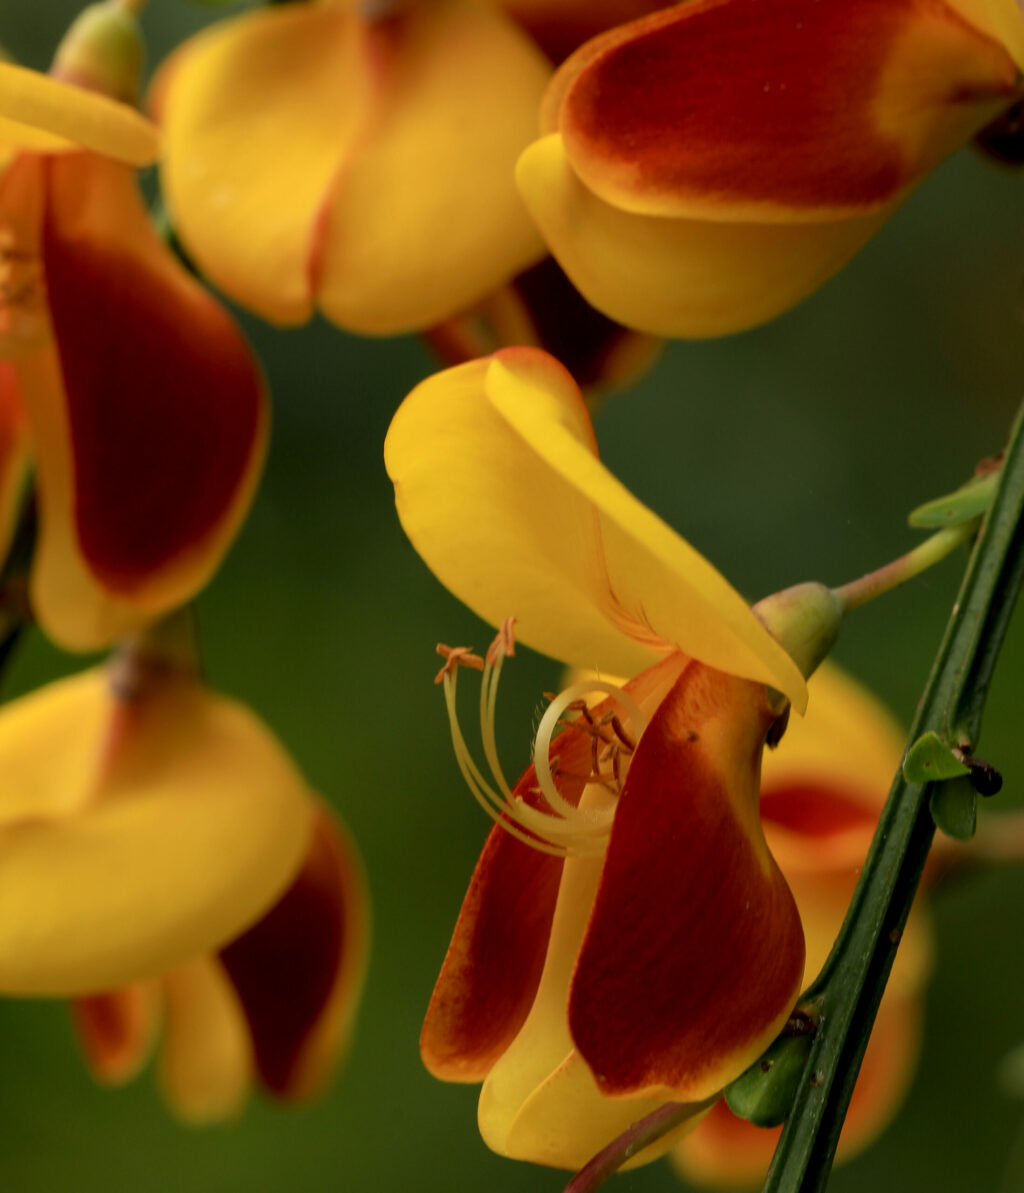 Scotch broom blooms, Tuesday, May 14, 2019 at Western Hills Garden in Occidental. (Kent Porter / Press Democrat) 2019